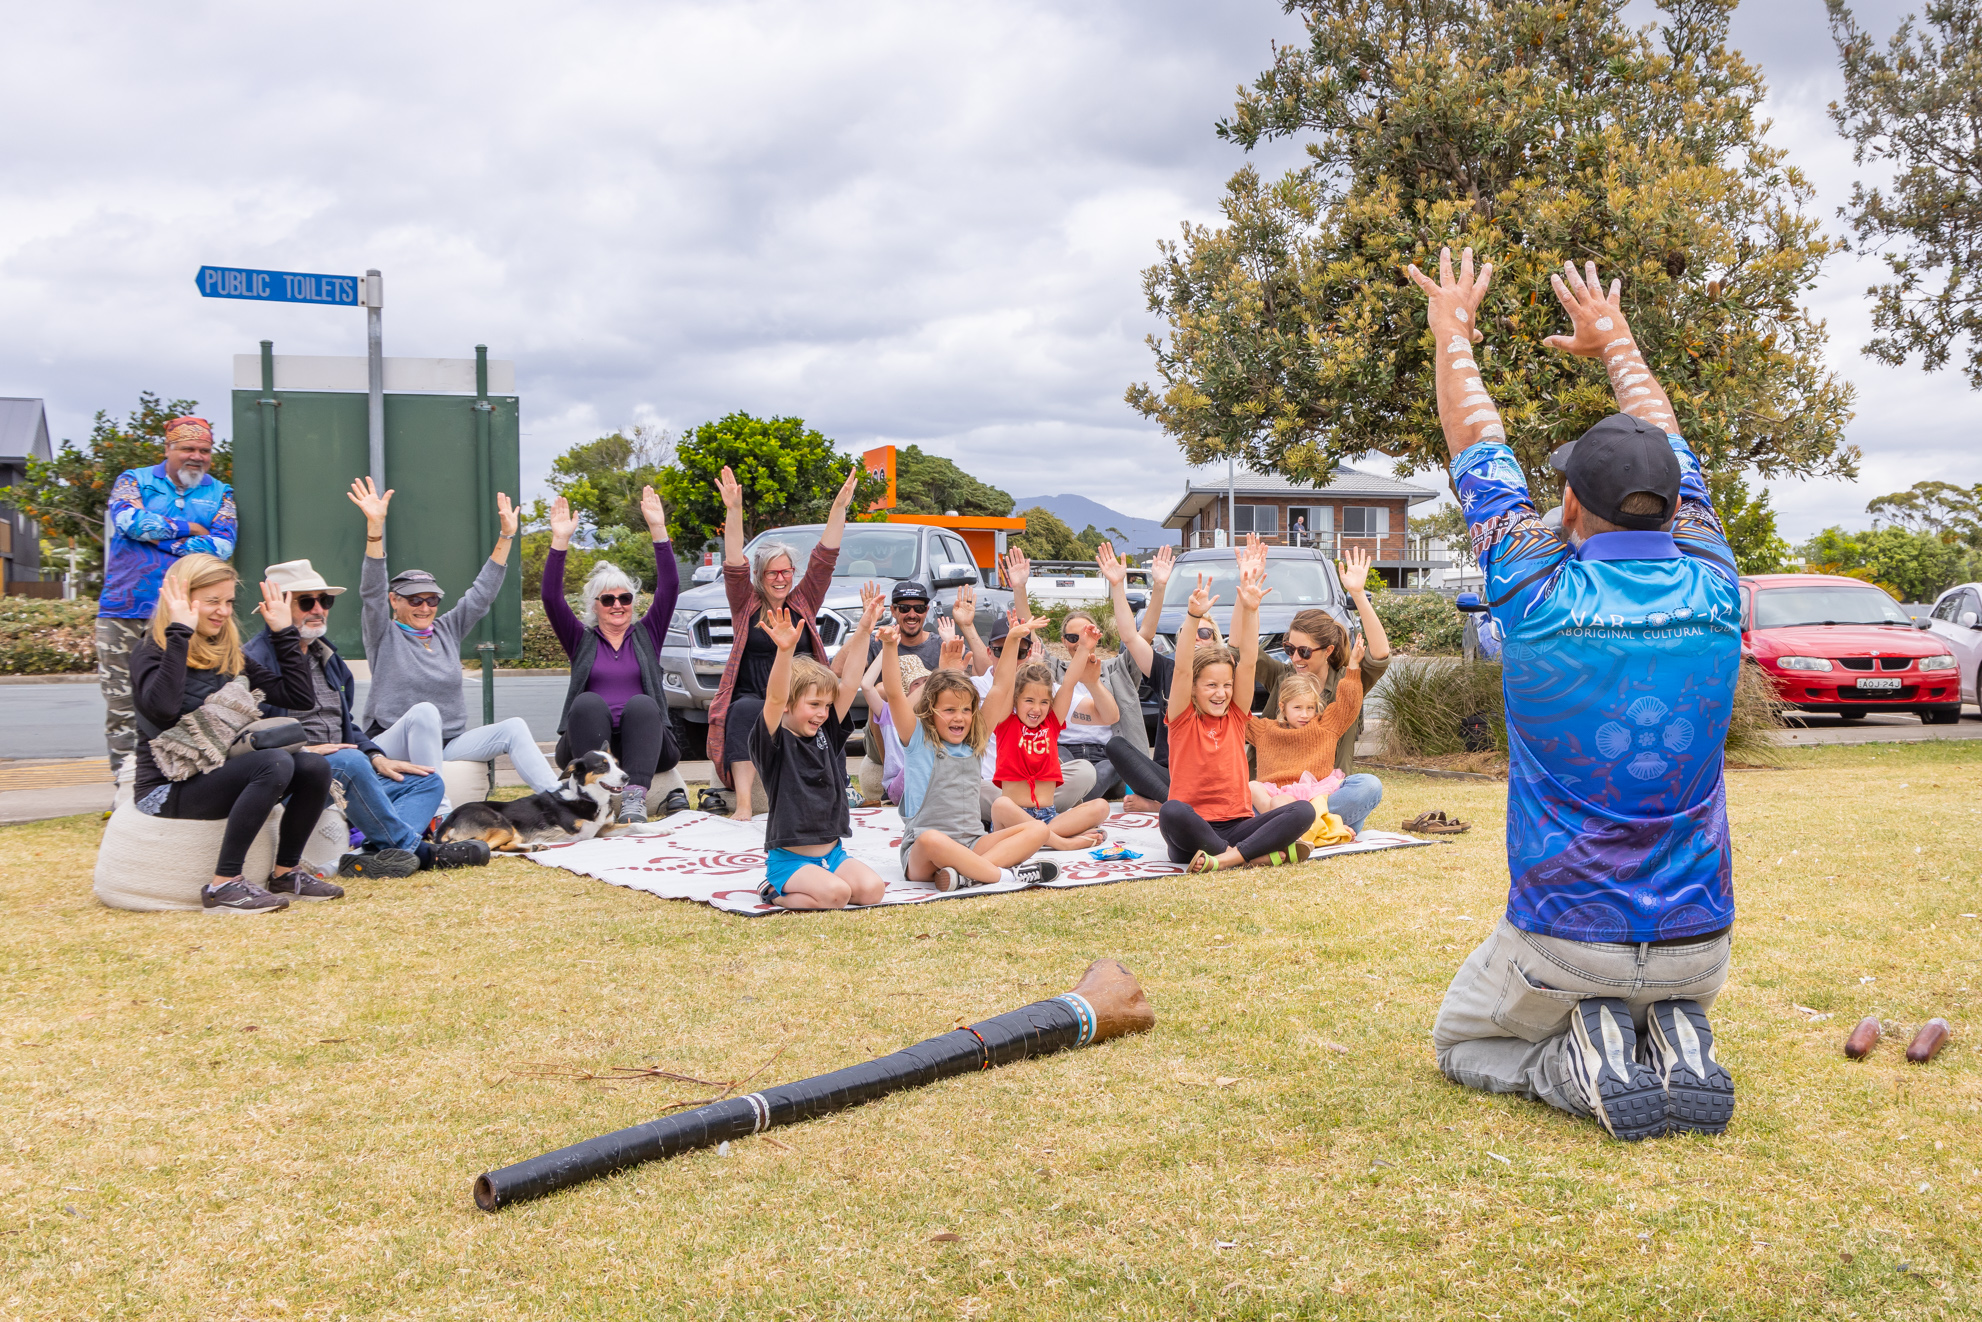 DIDGERIDOO AND DANCE WORKSHOP/PERFORMANCE WITH NIGEL STEWART OF BUNITCH DREAMING - All welcome for this incredible performance. Bring the kids.